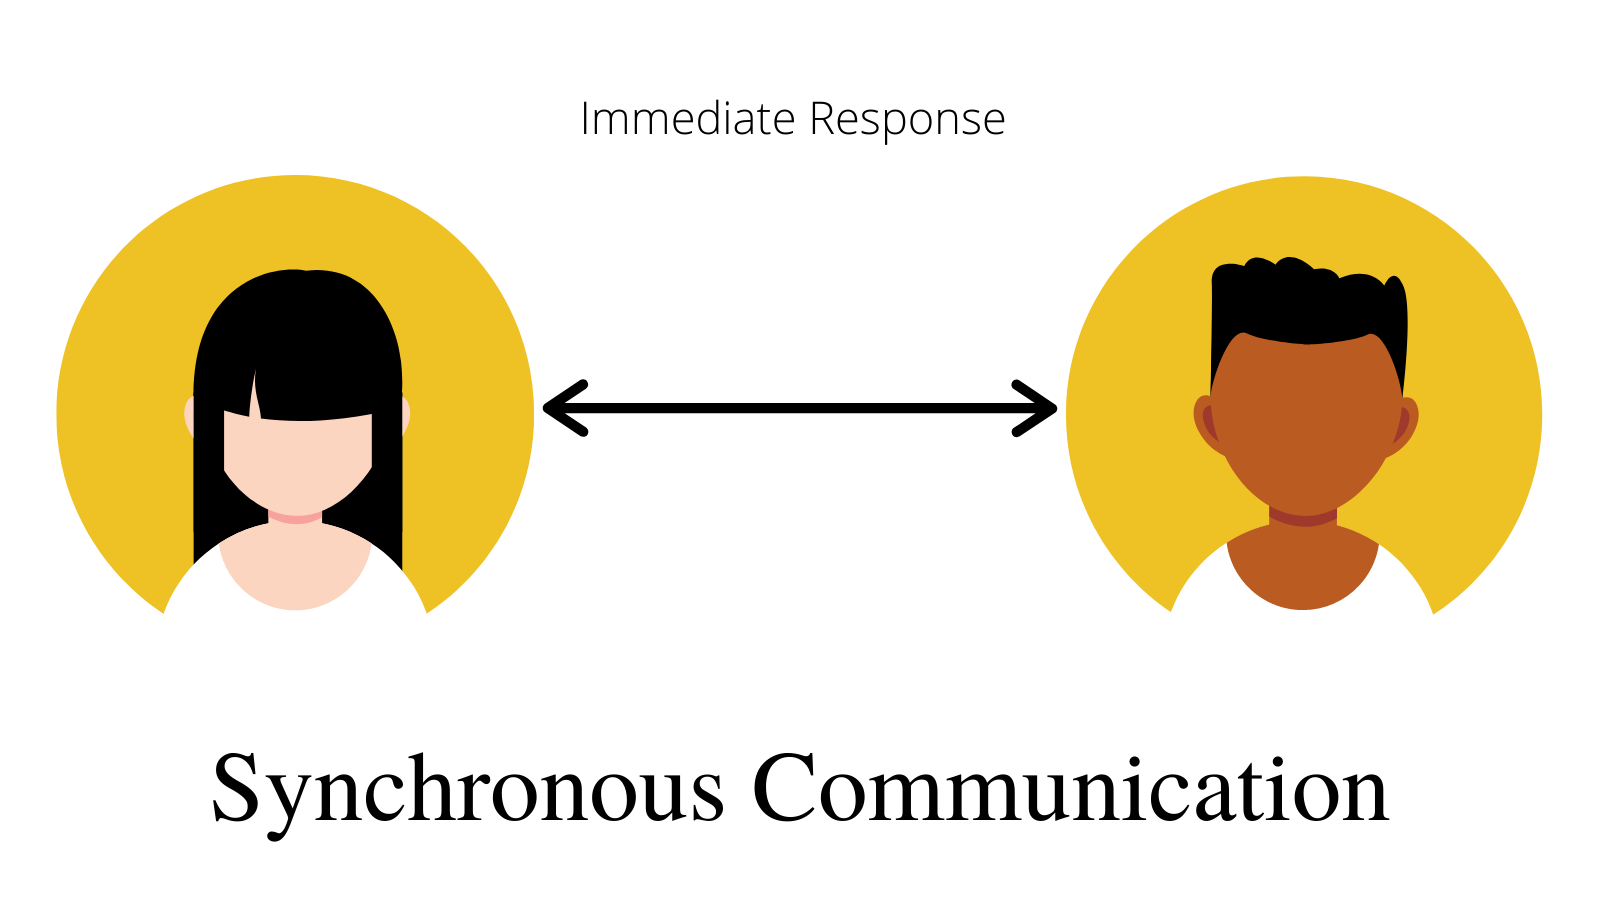 Diagram illustrating synchronous communication, where there is an immediate response to sending information